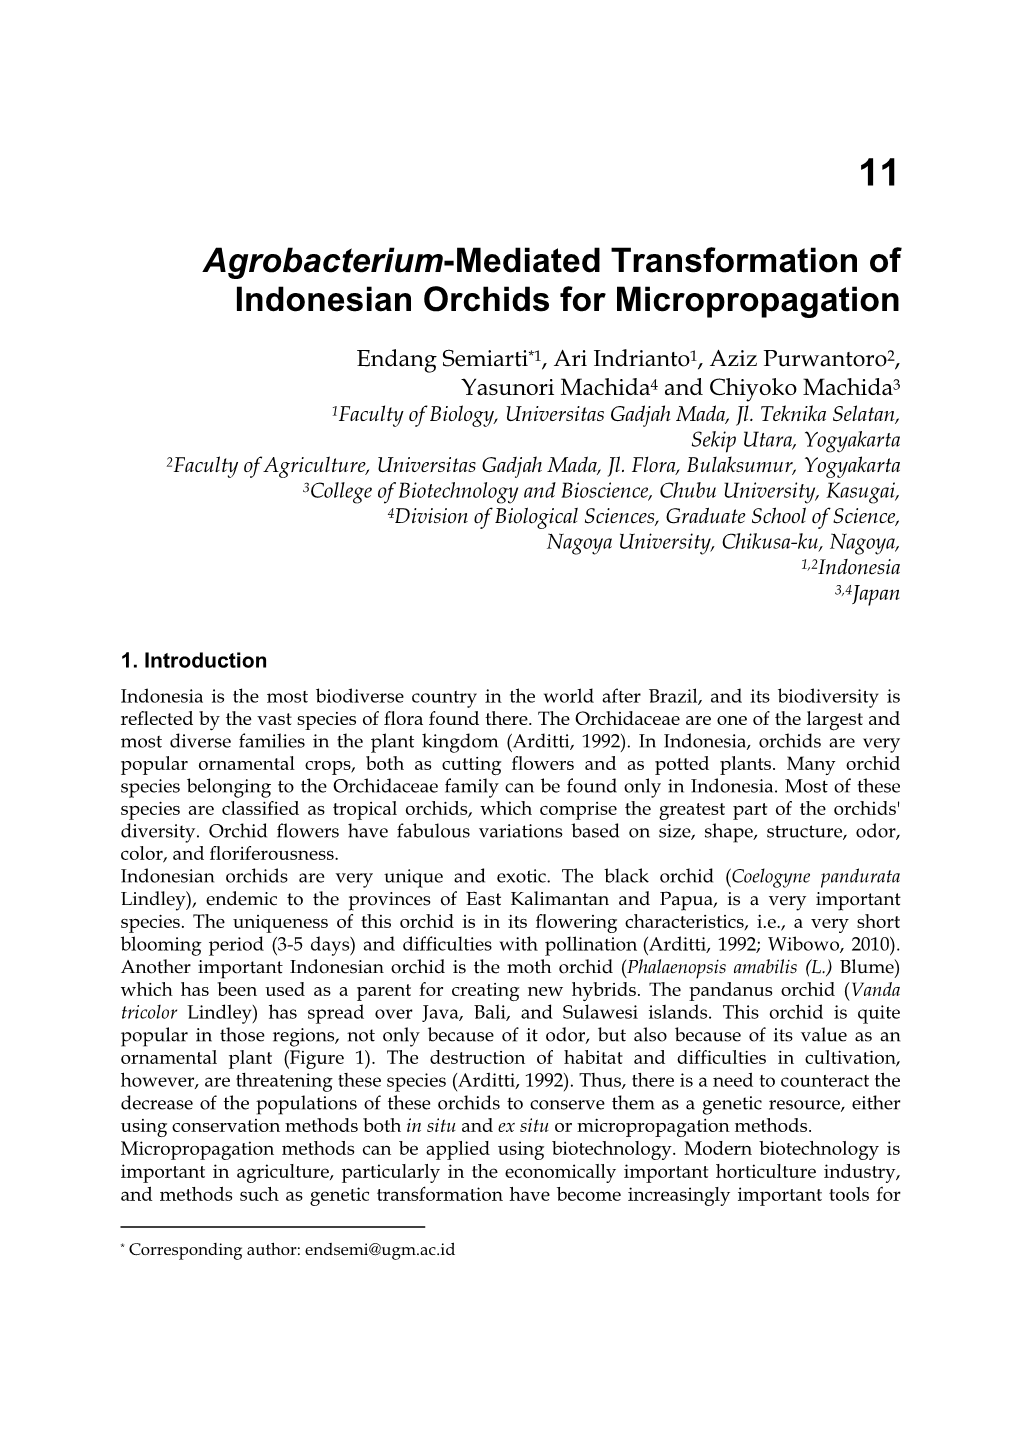 Agrobacterium-Mediated Transformation of Indonesian Orchids for Micropropagation